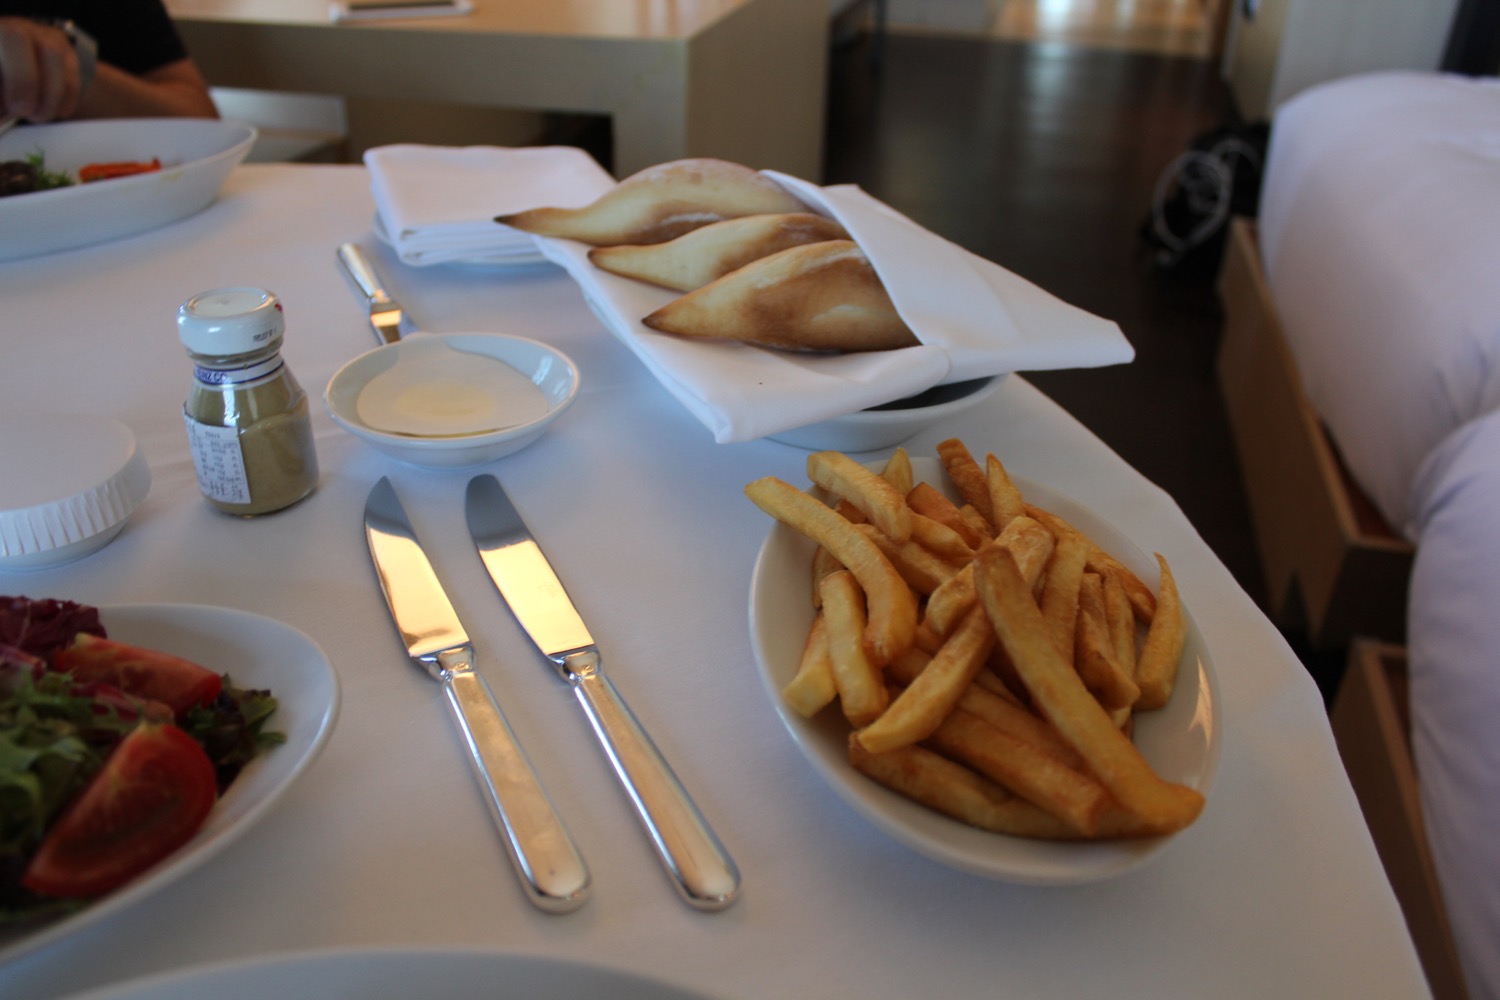 a plate of french fries and bread on a table